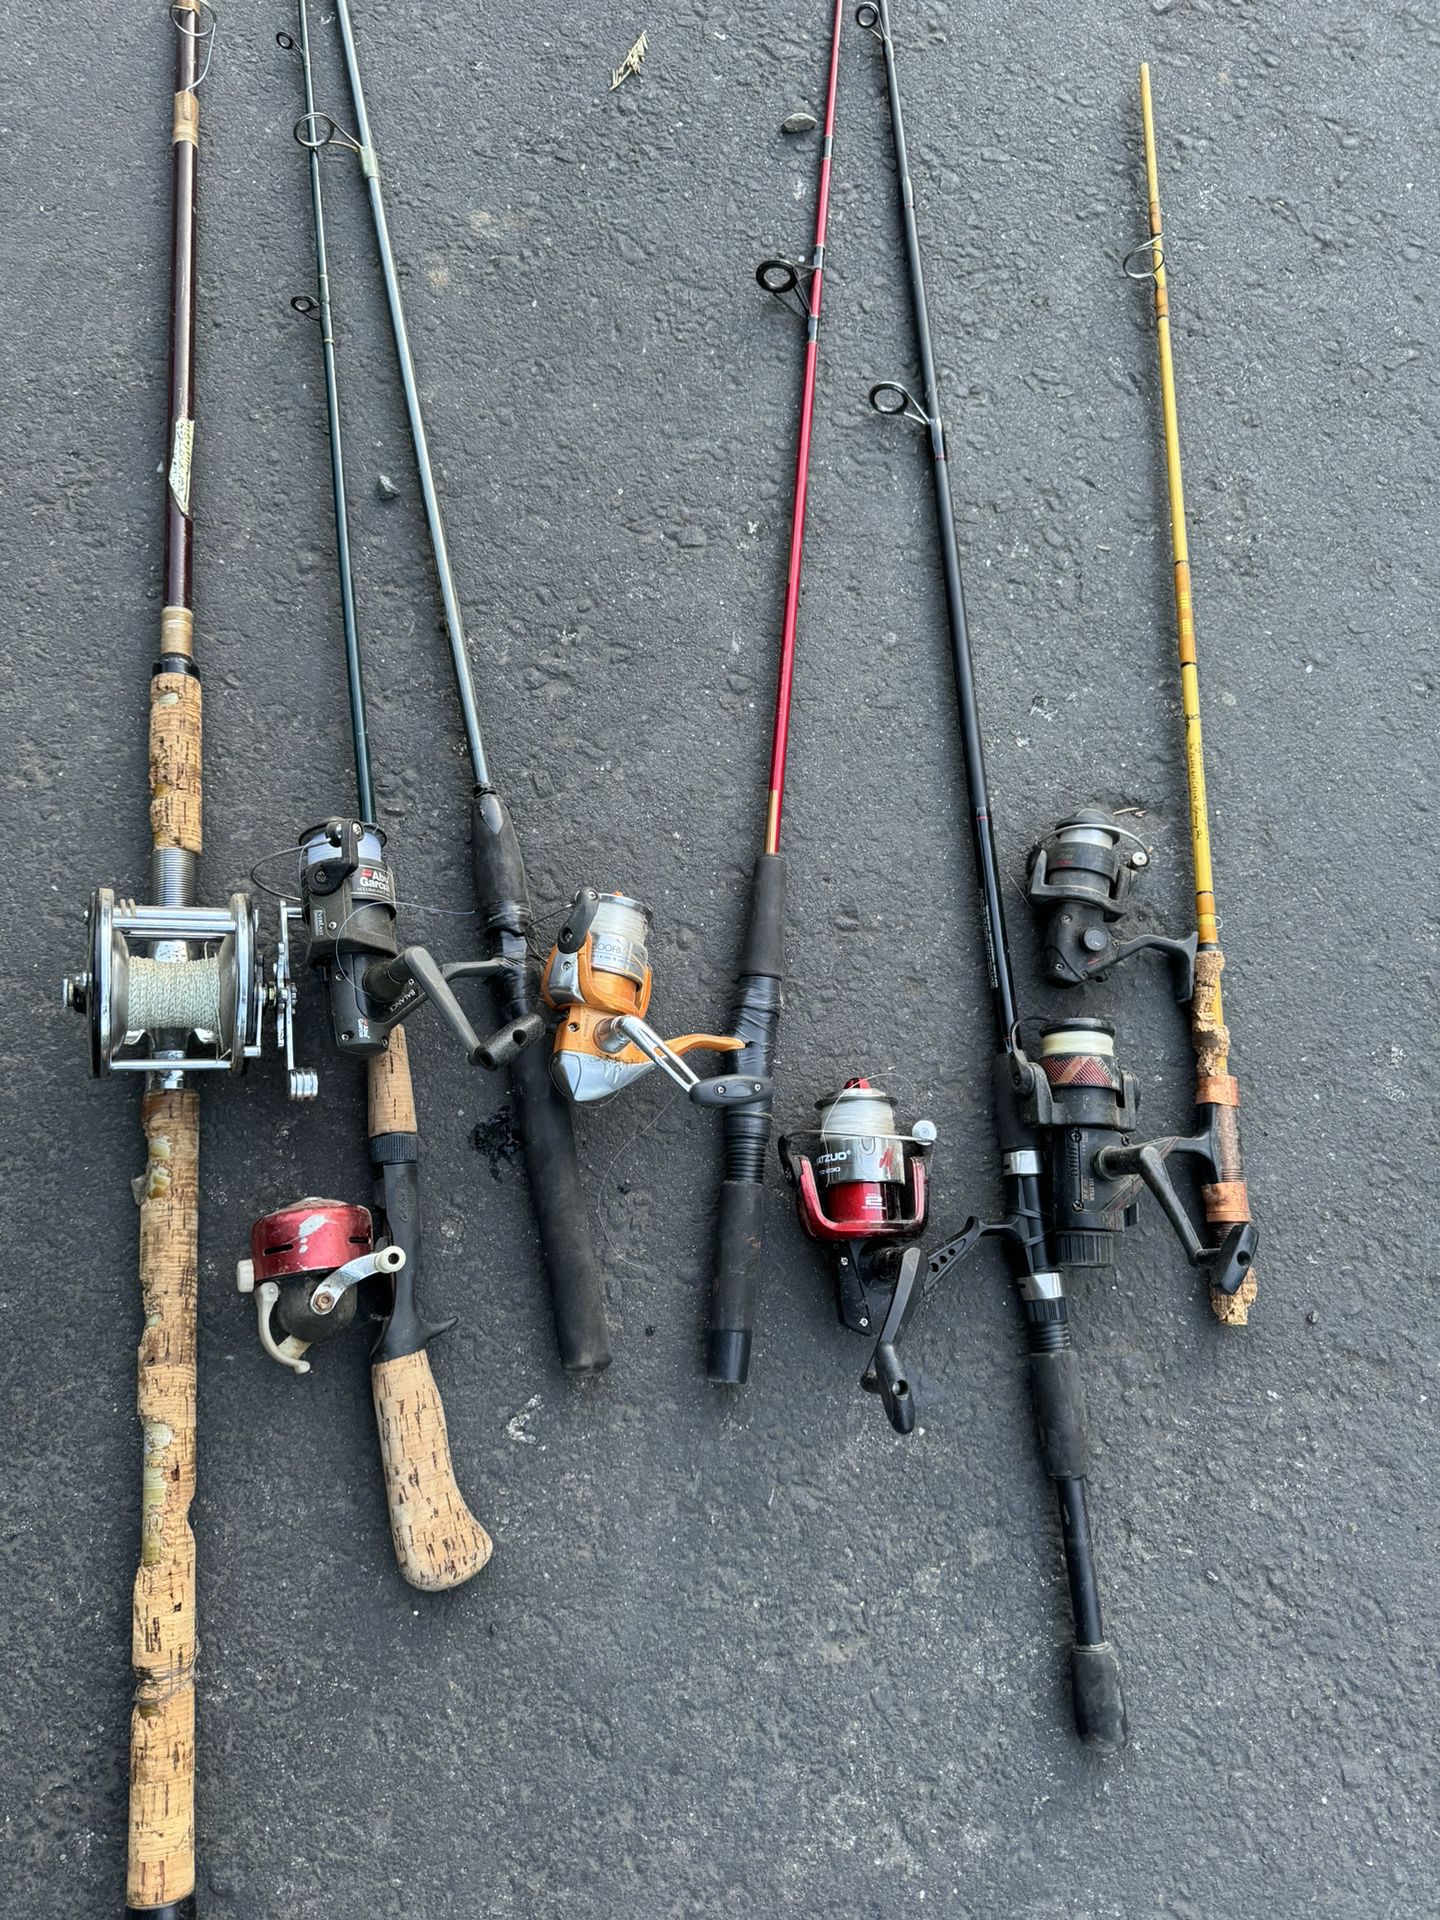 6 fishing poles  with Reels an 23 fishing poles with no Reels used 